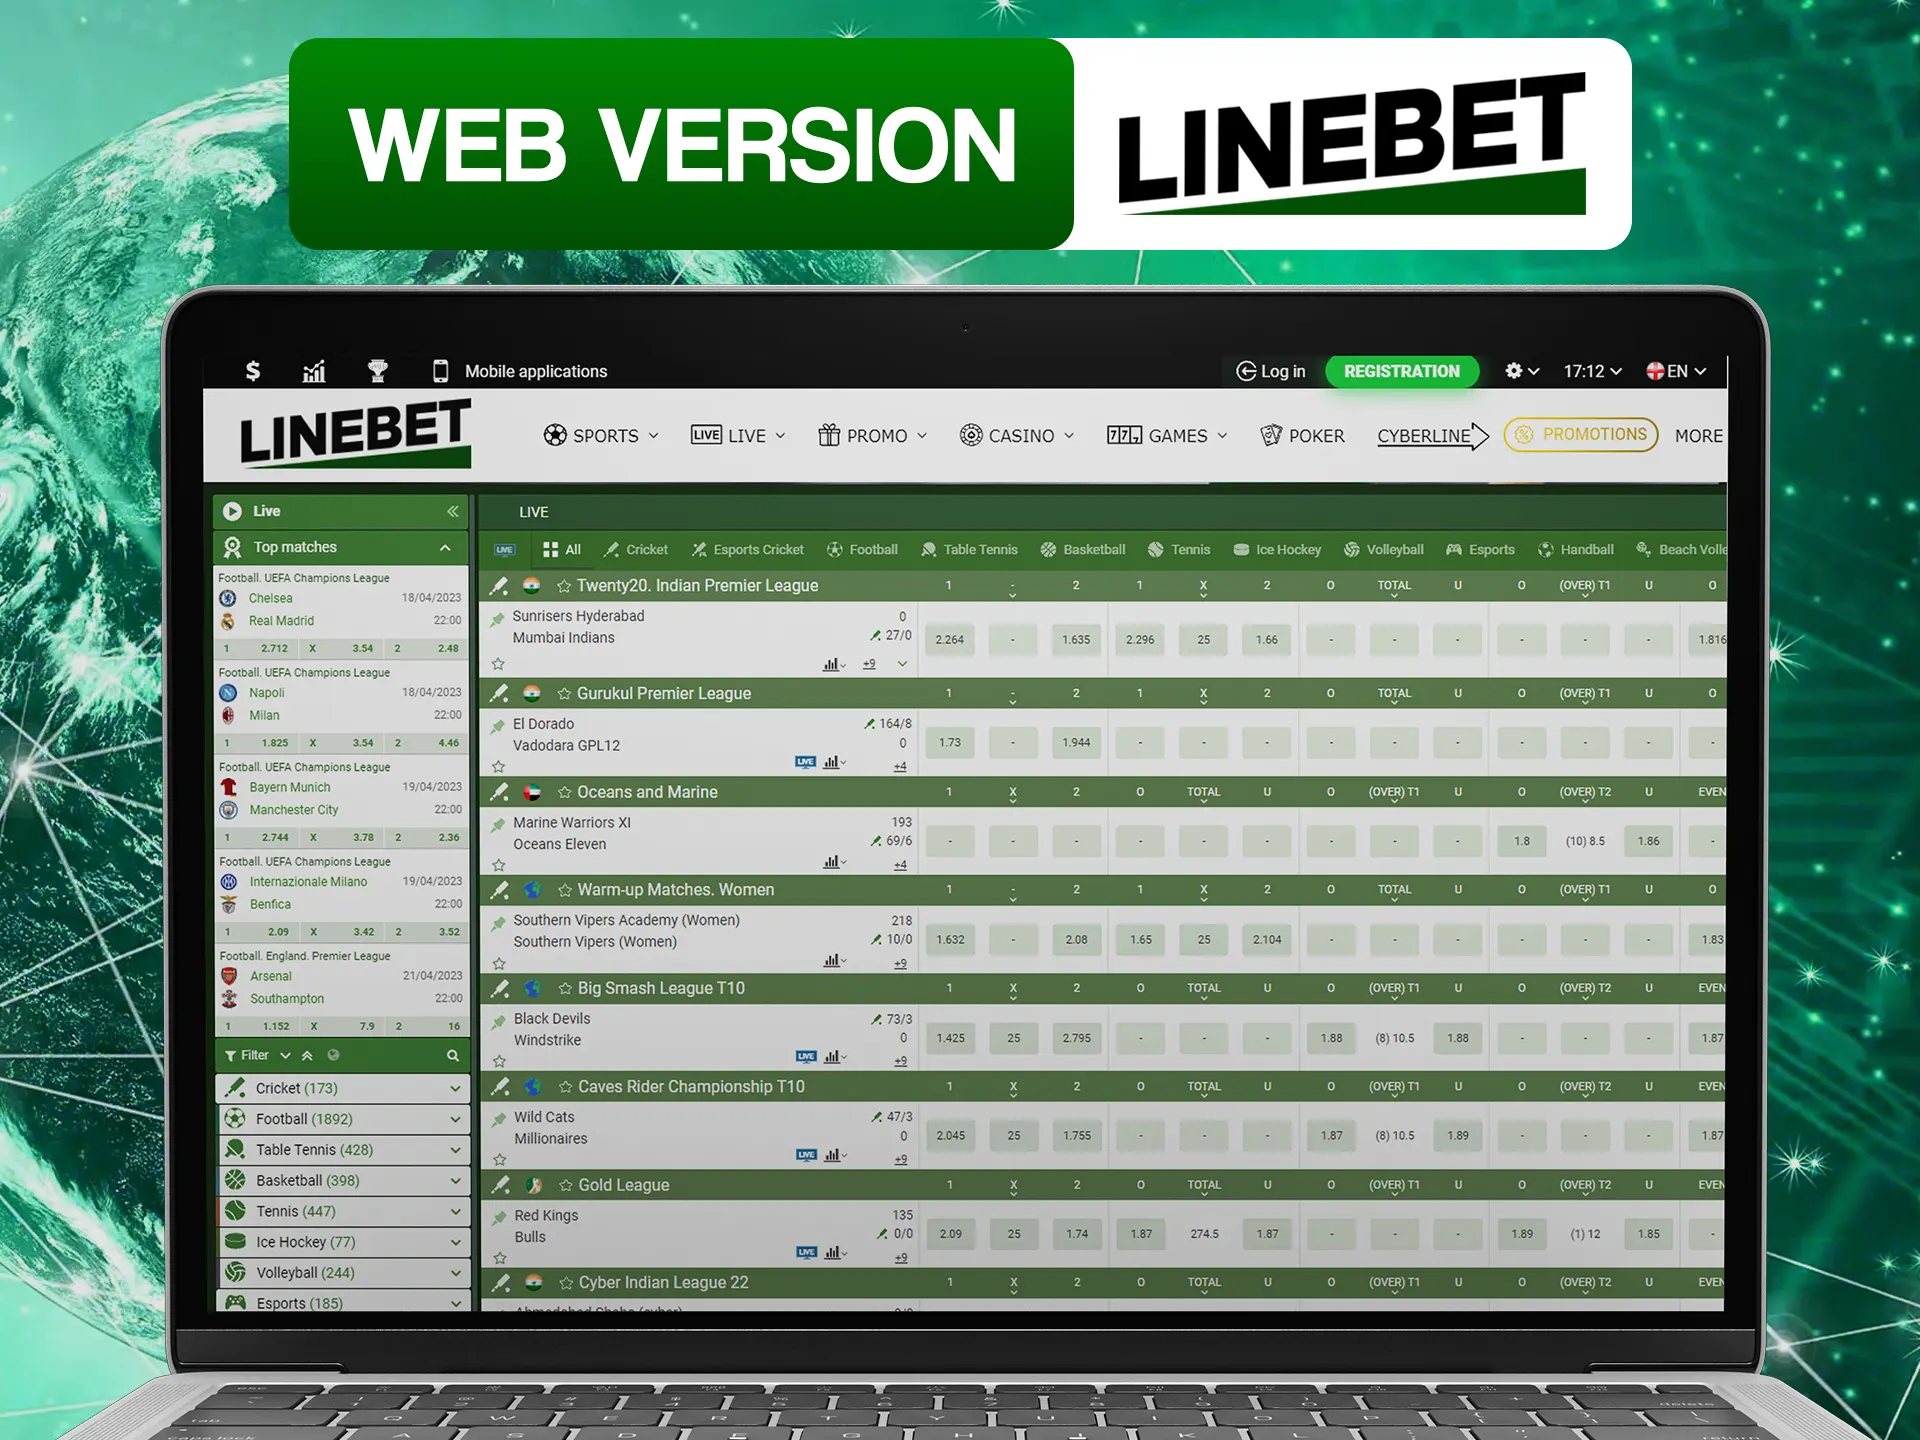 Use web version of Linebet website on any device with internet connection.